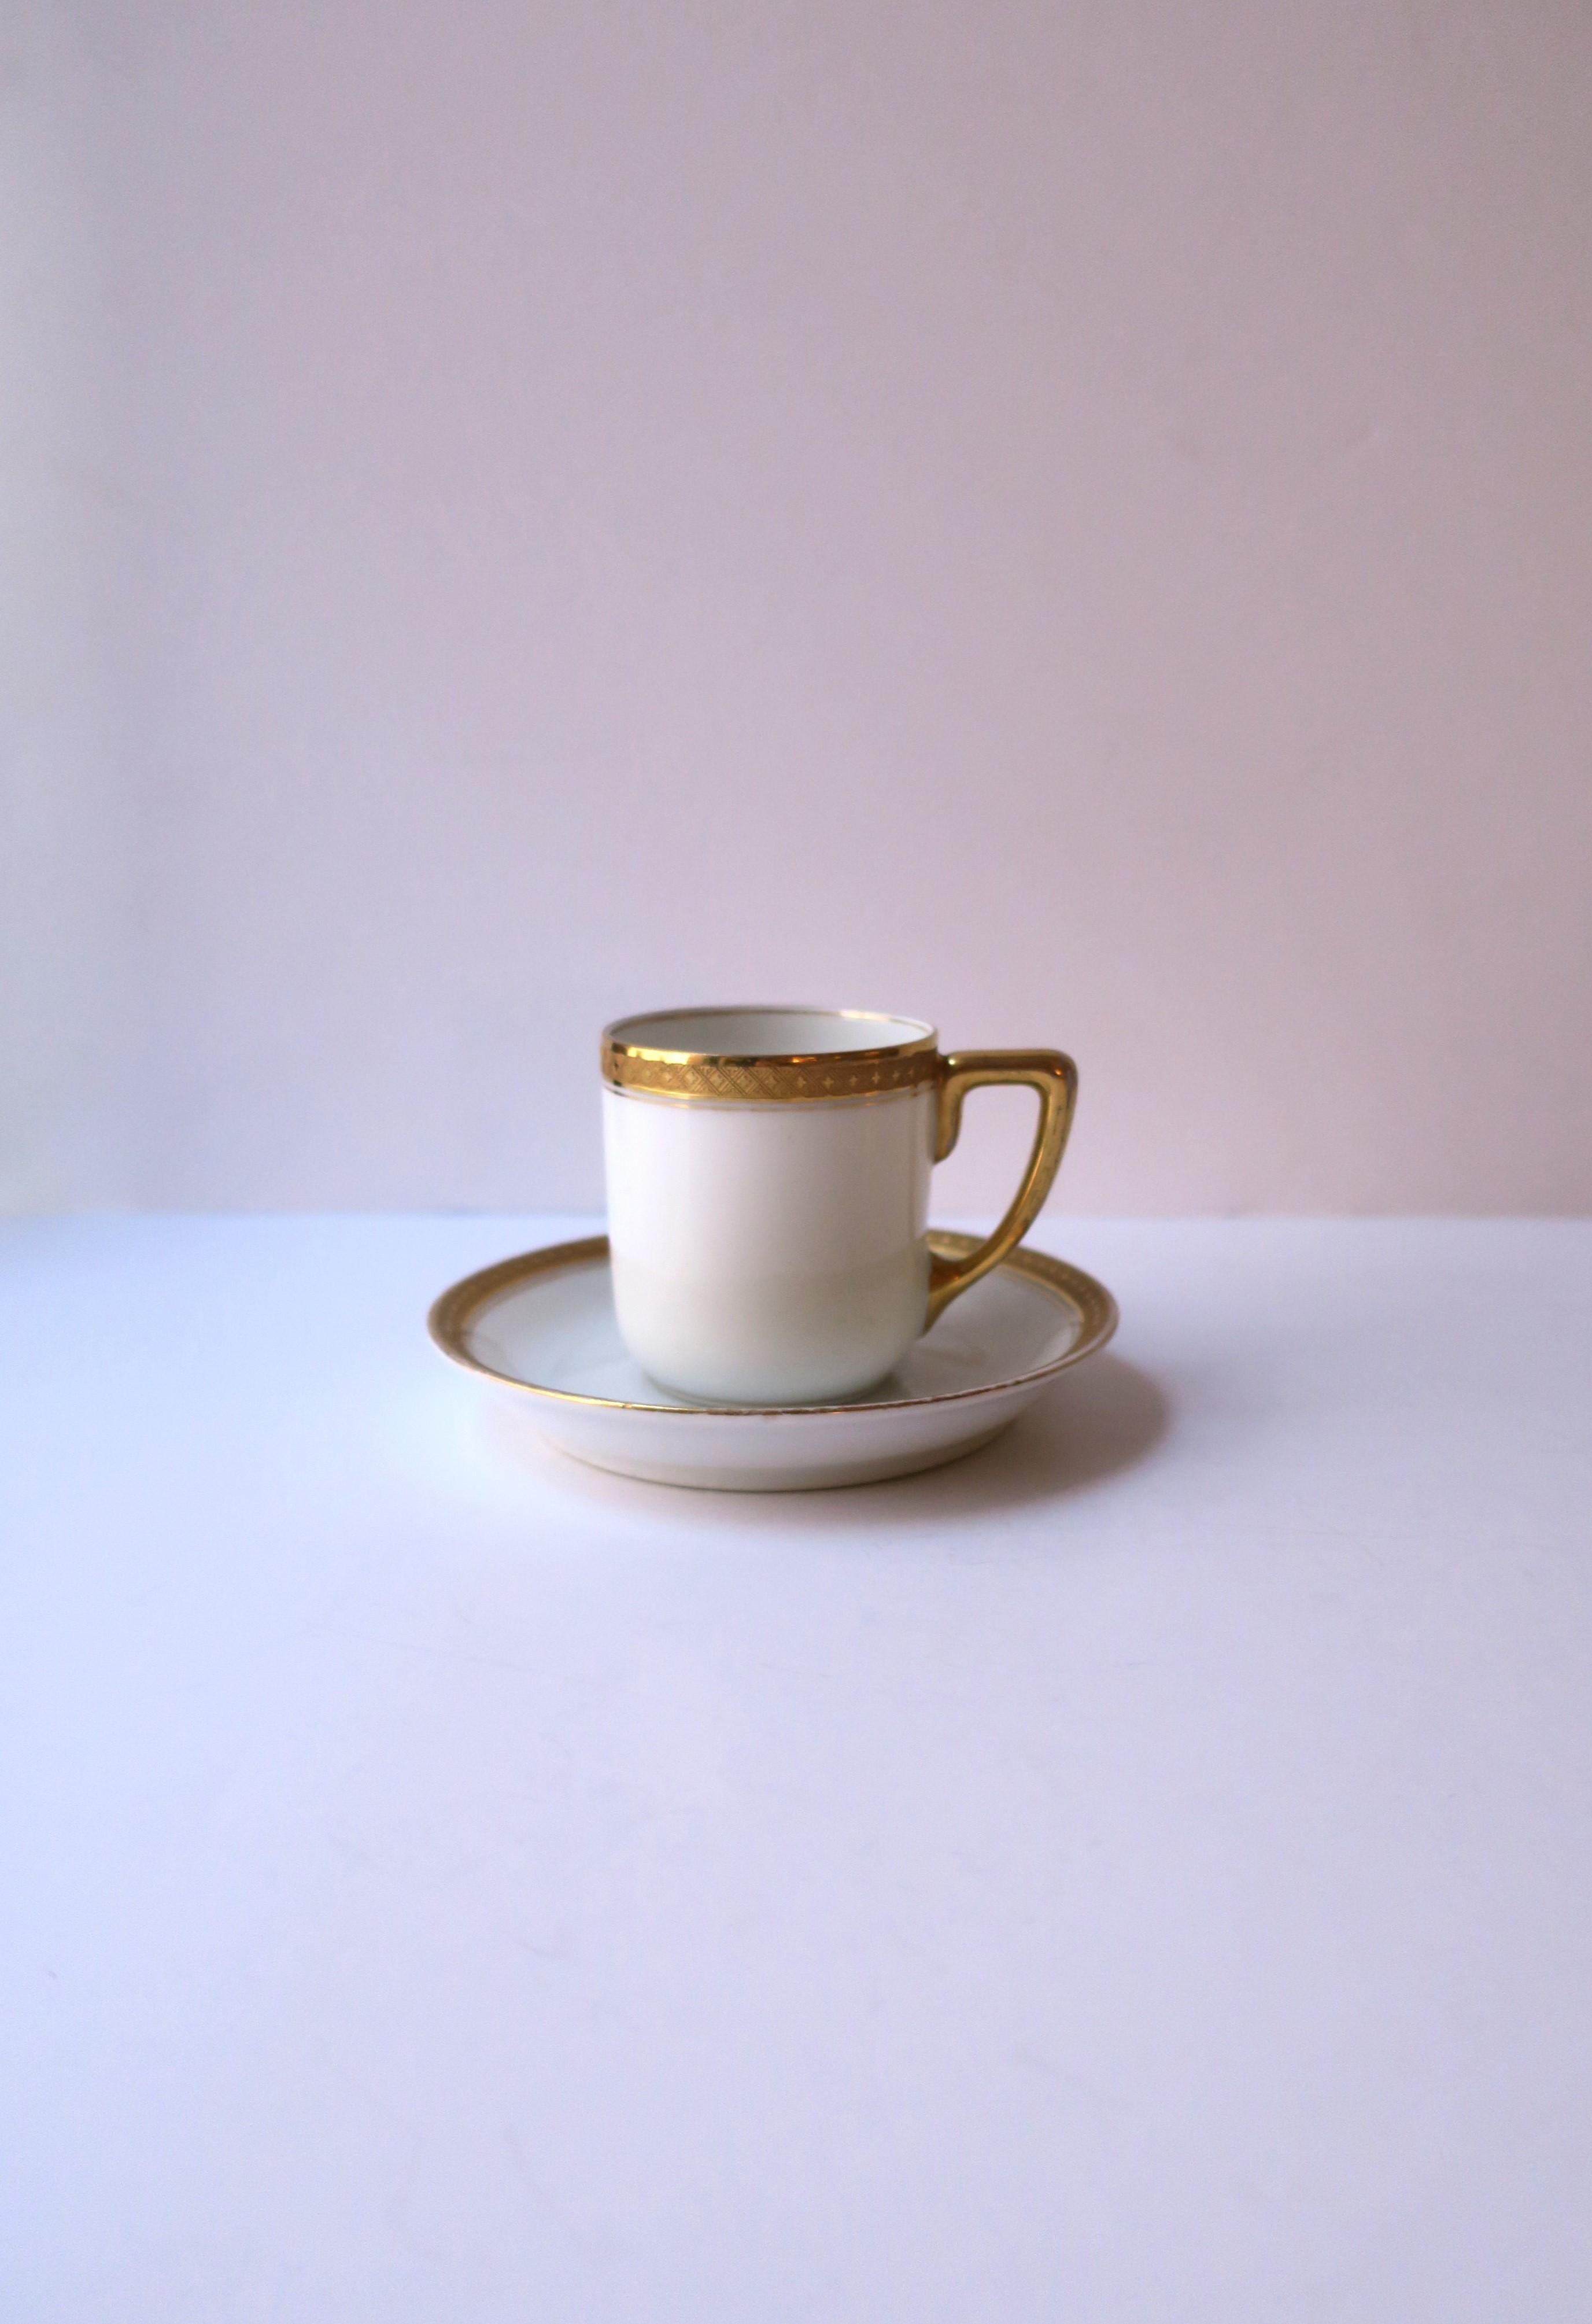 Porcelain White and Gold Coffee Espresso Tea Demitasse Cup and Saucer Rosenthal In Good Condition For Sale In New York, NY